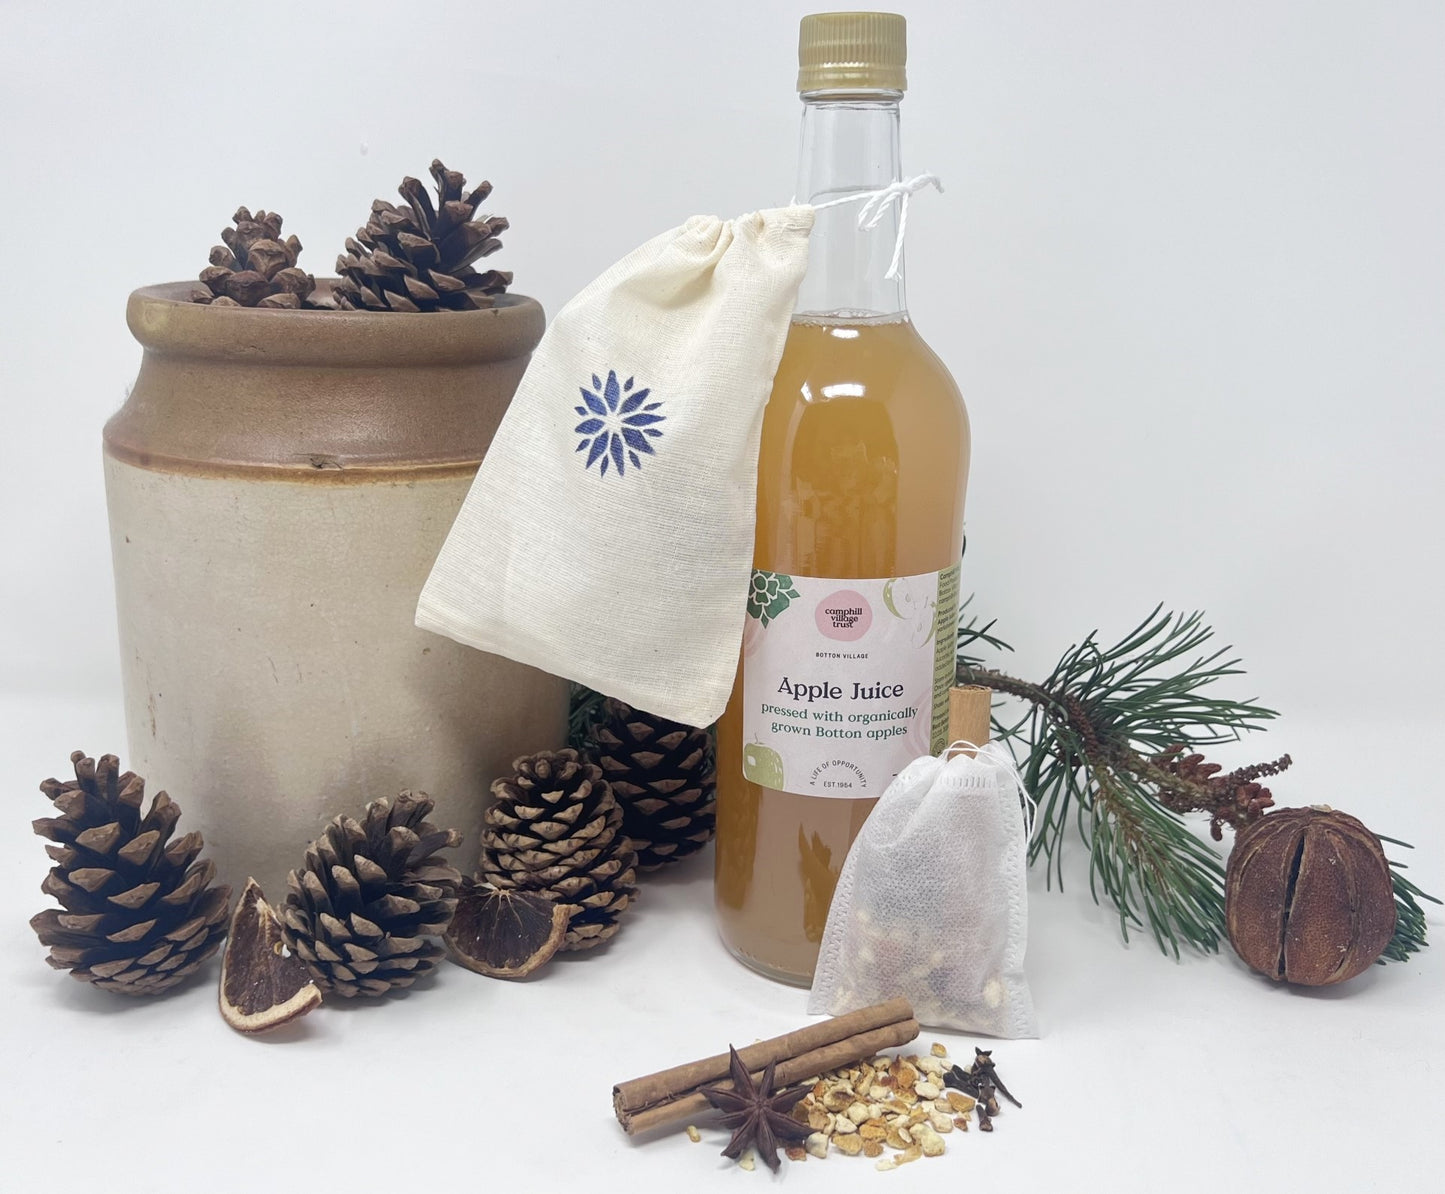 Make-your-own Mulled Apple Juice Kit